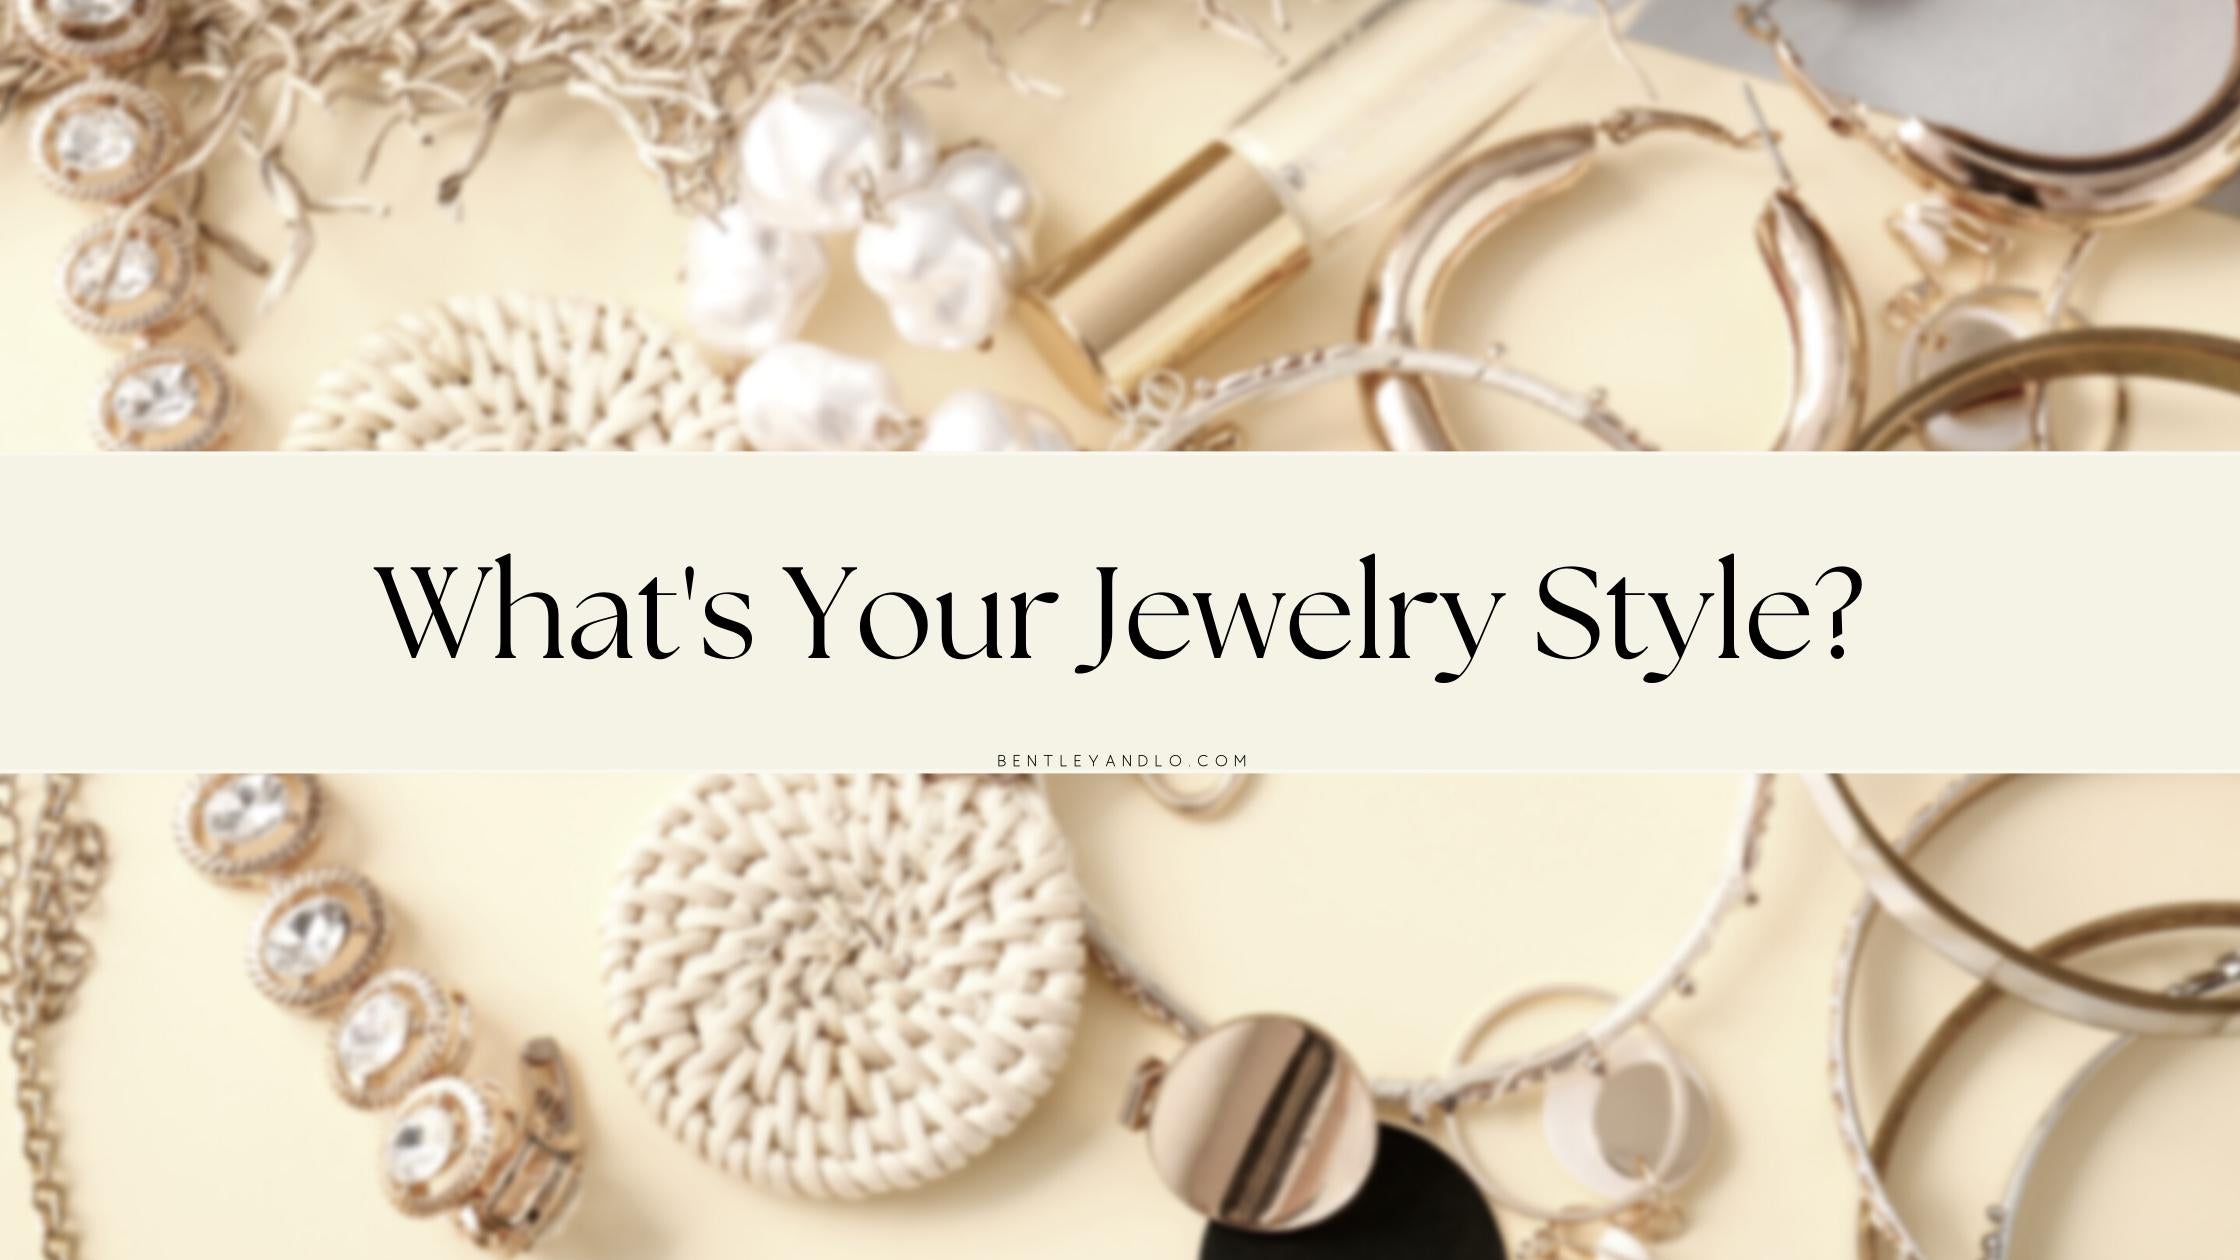 What's Your Jewelry Style?